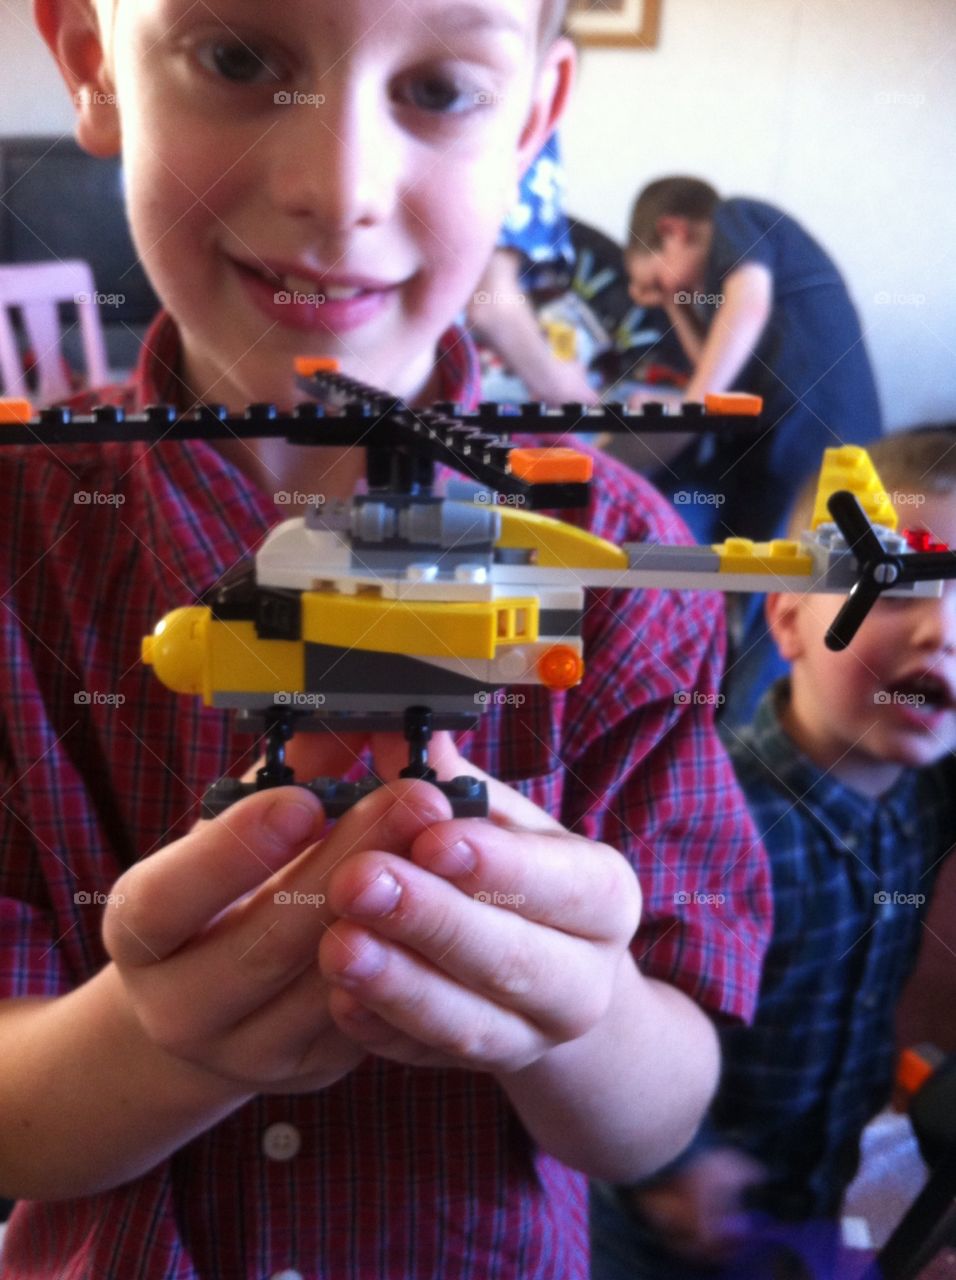 Lego creation. Lego helicopter made by a boy